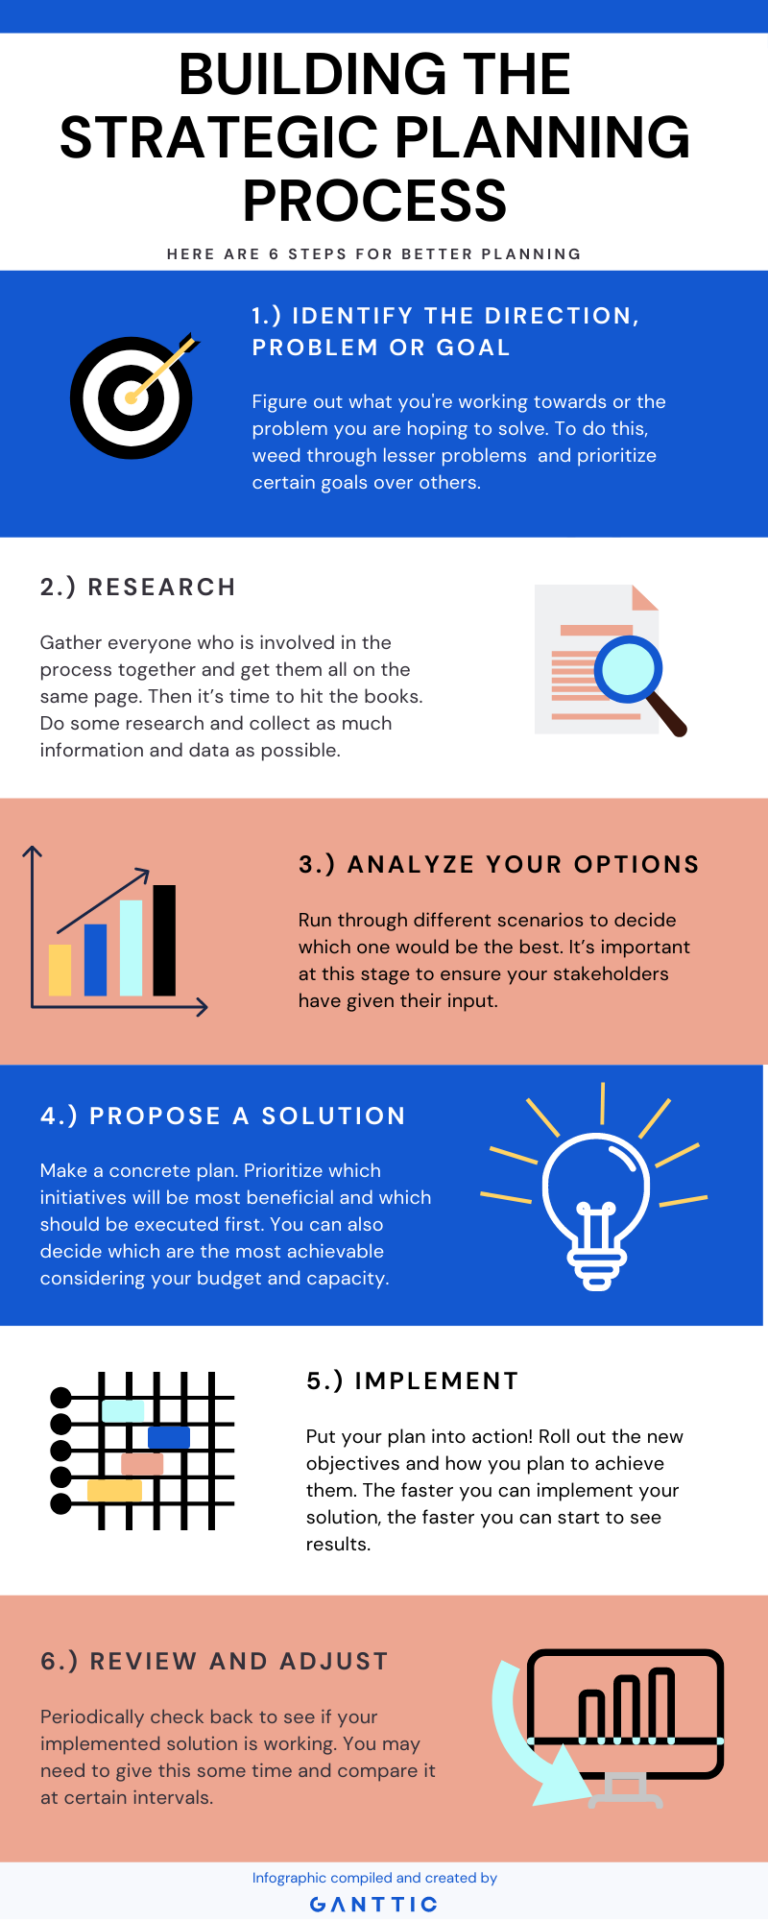 infographic for the 6 steps of building a strategic planning process. 